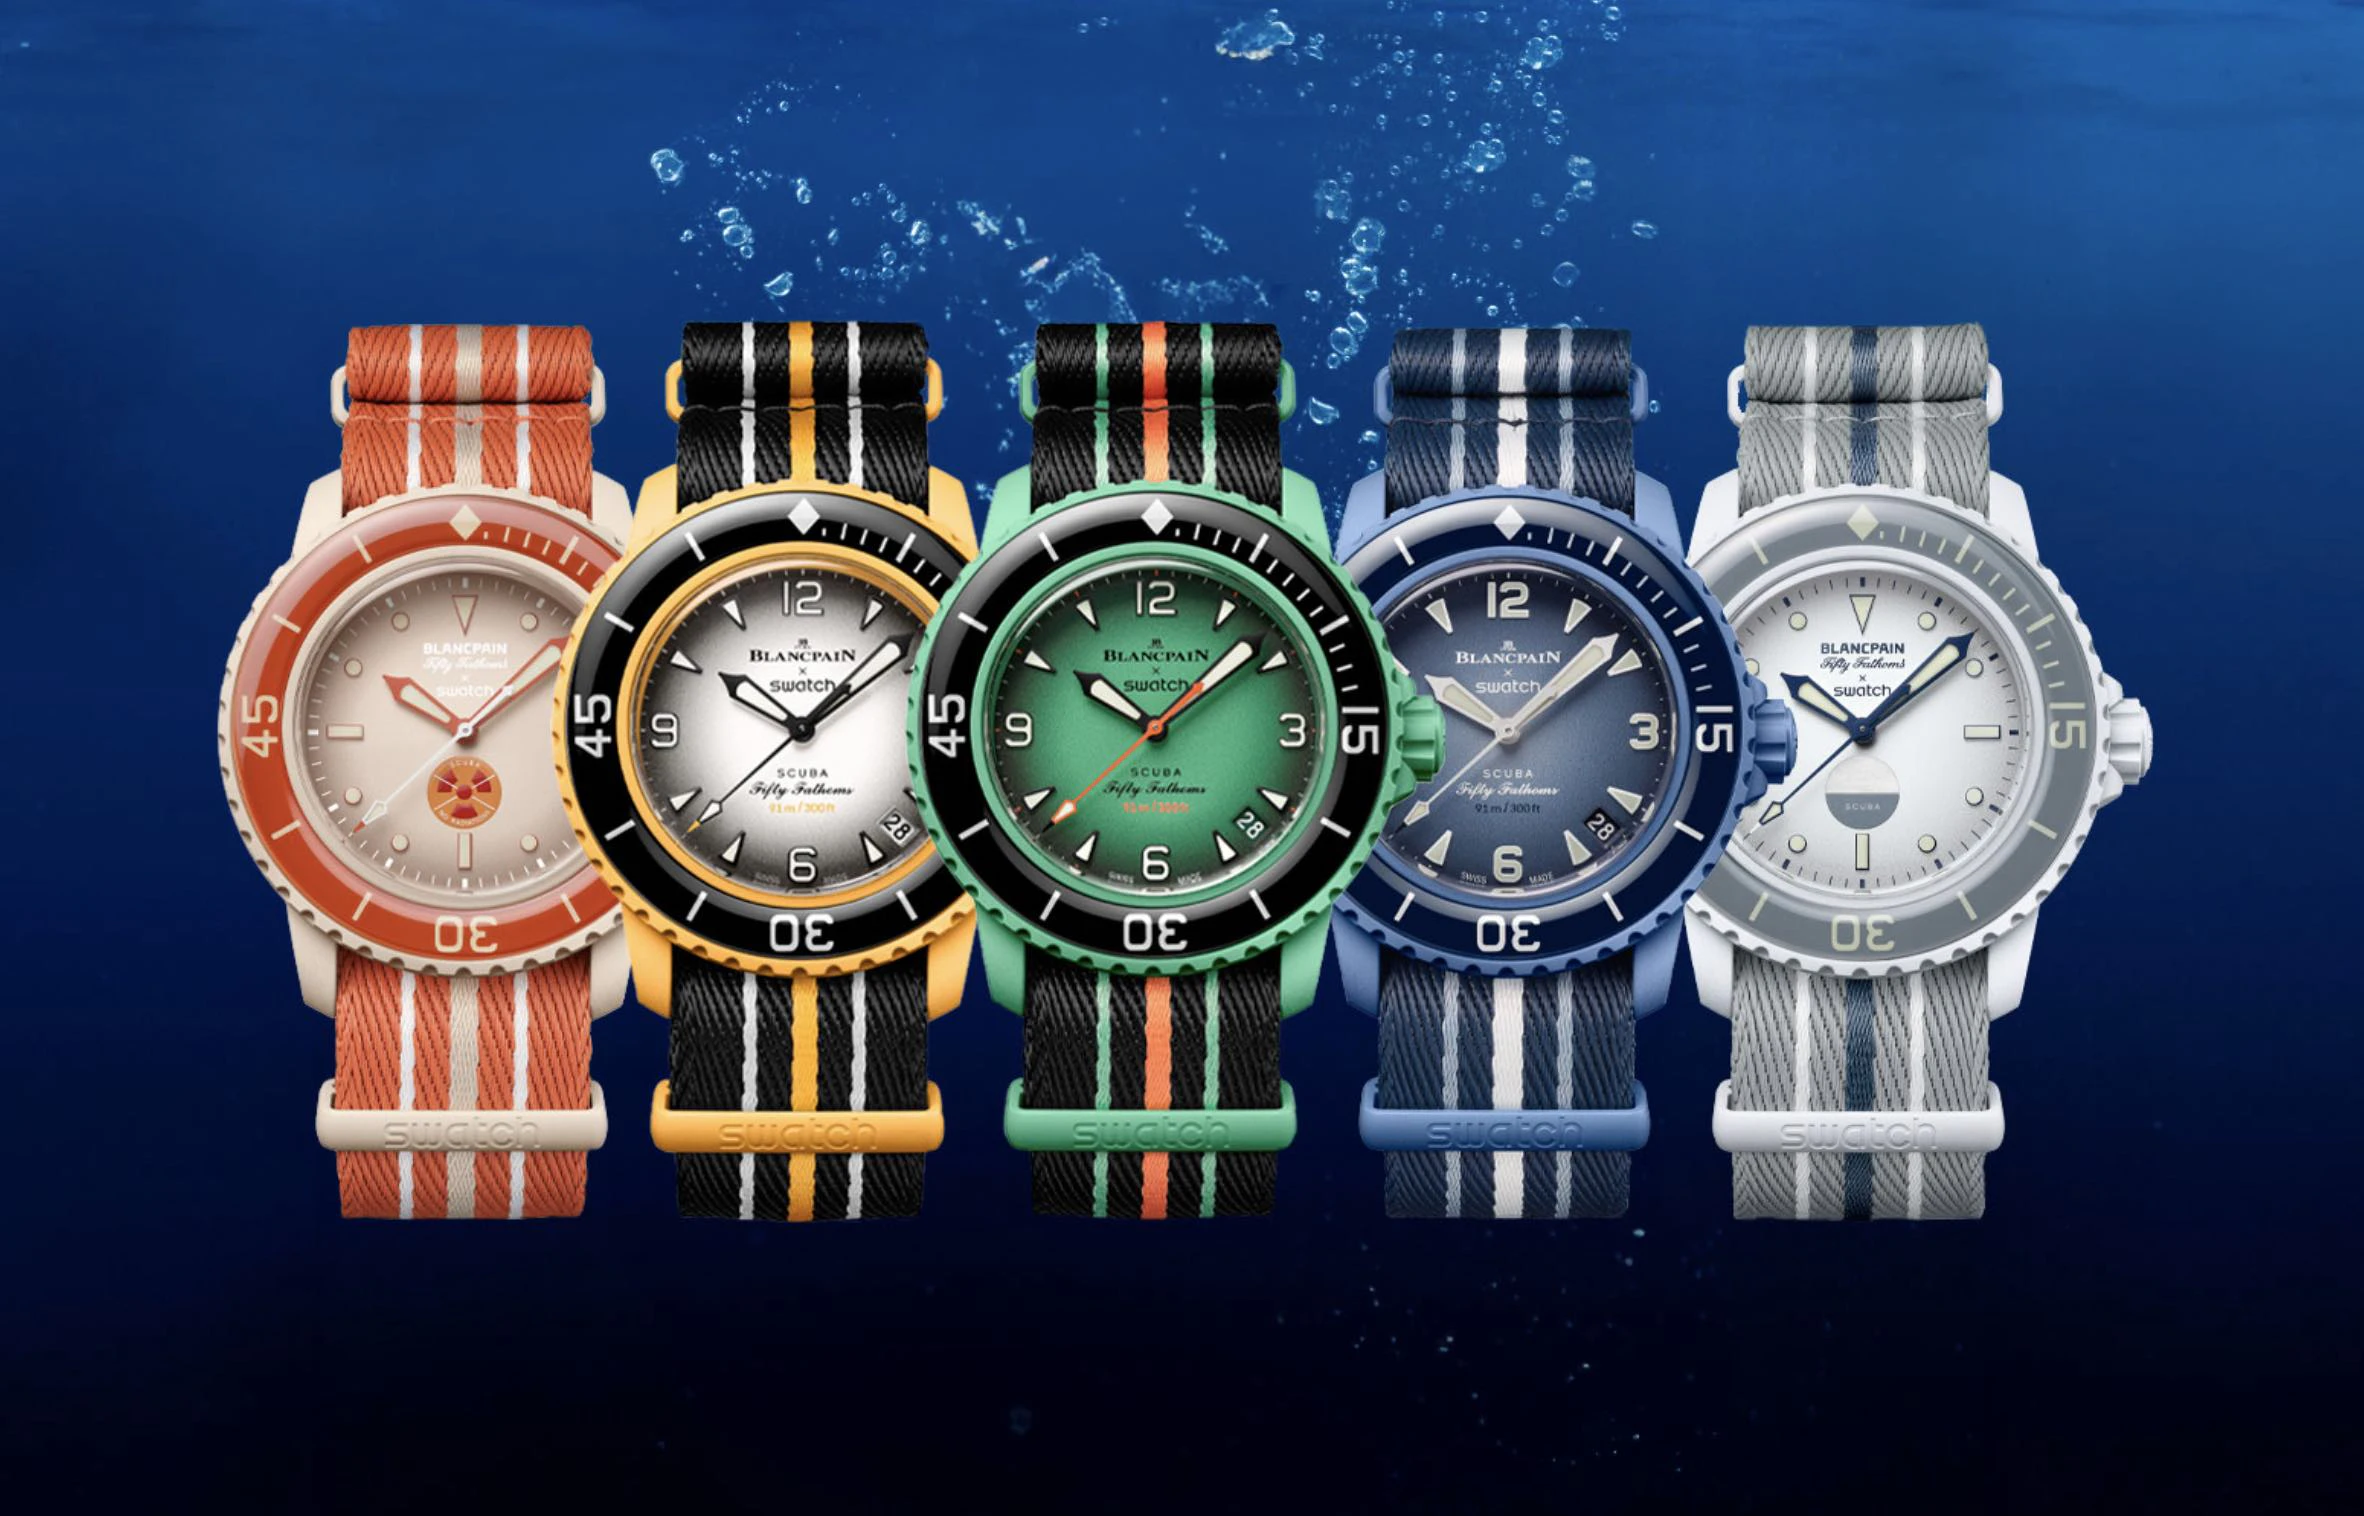 Swatch x Blancpain: the new watchmaking collaboration